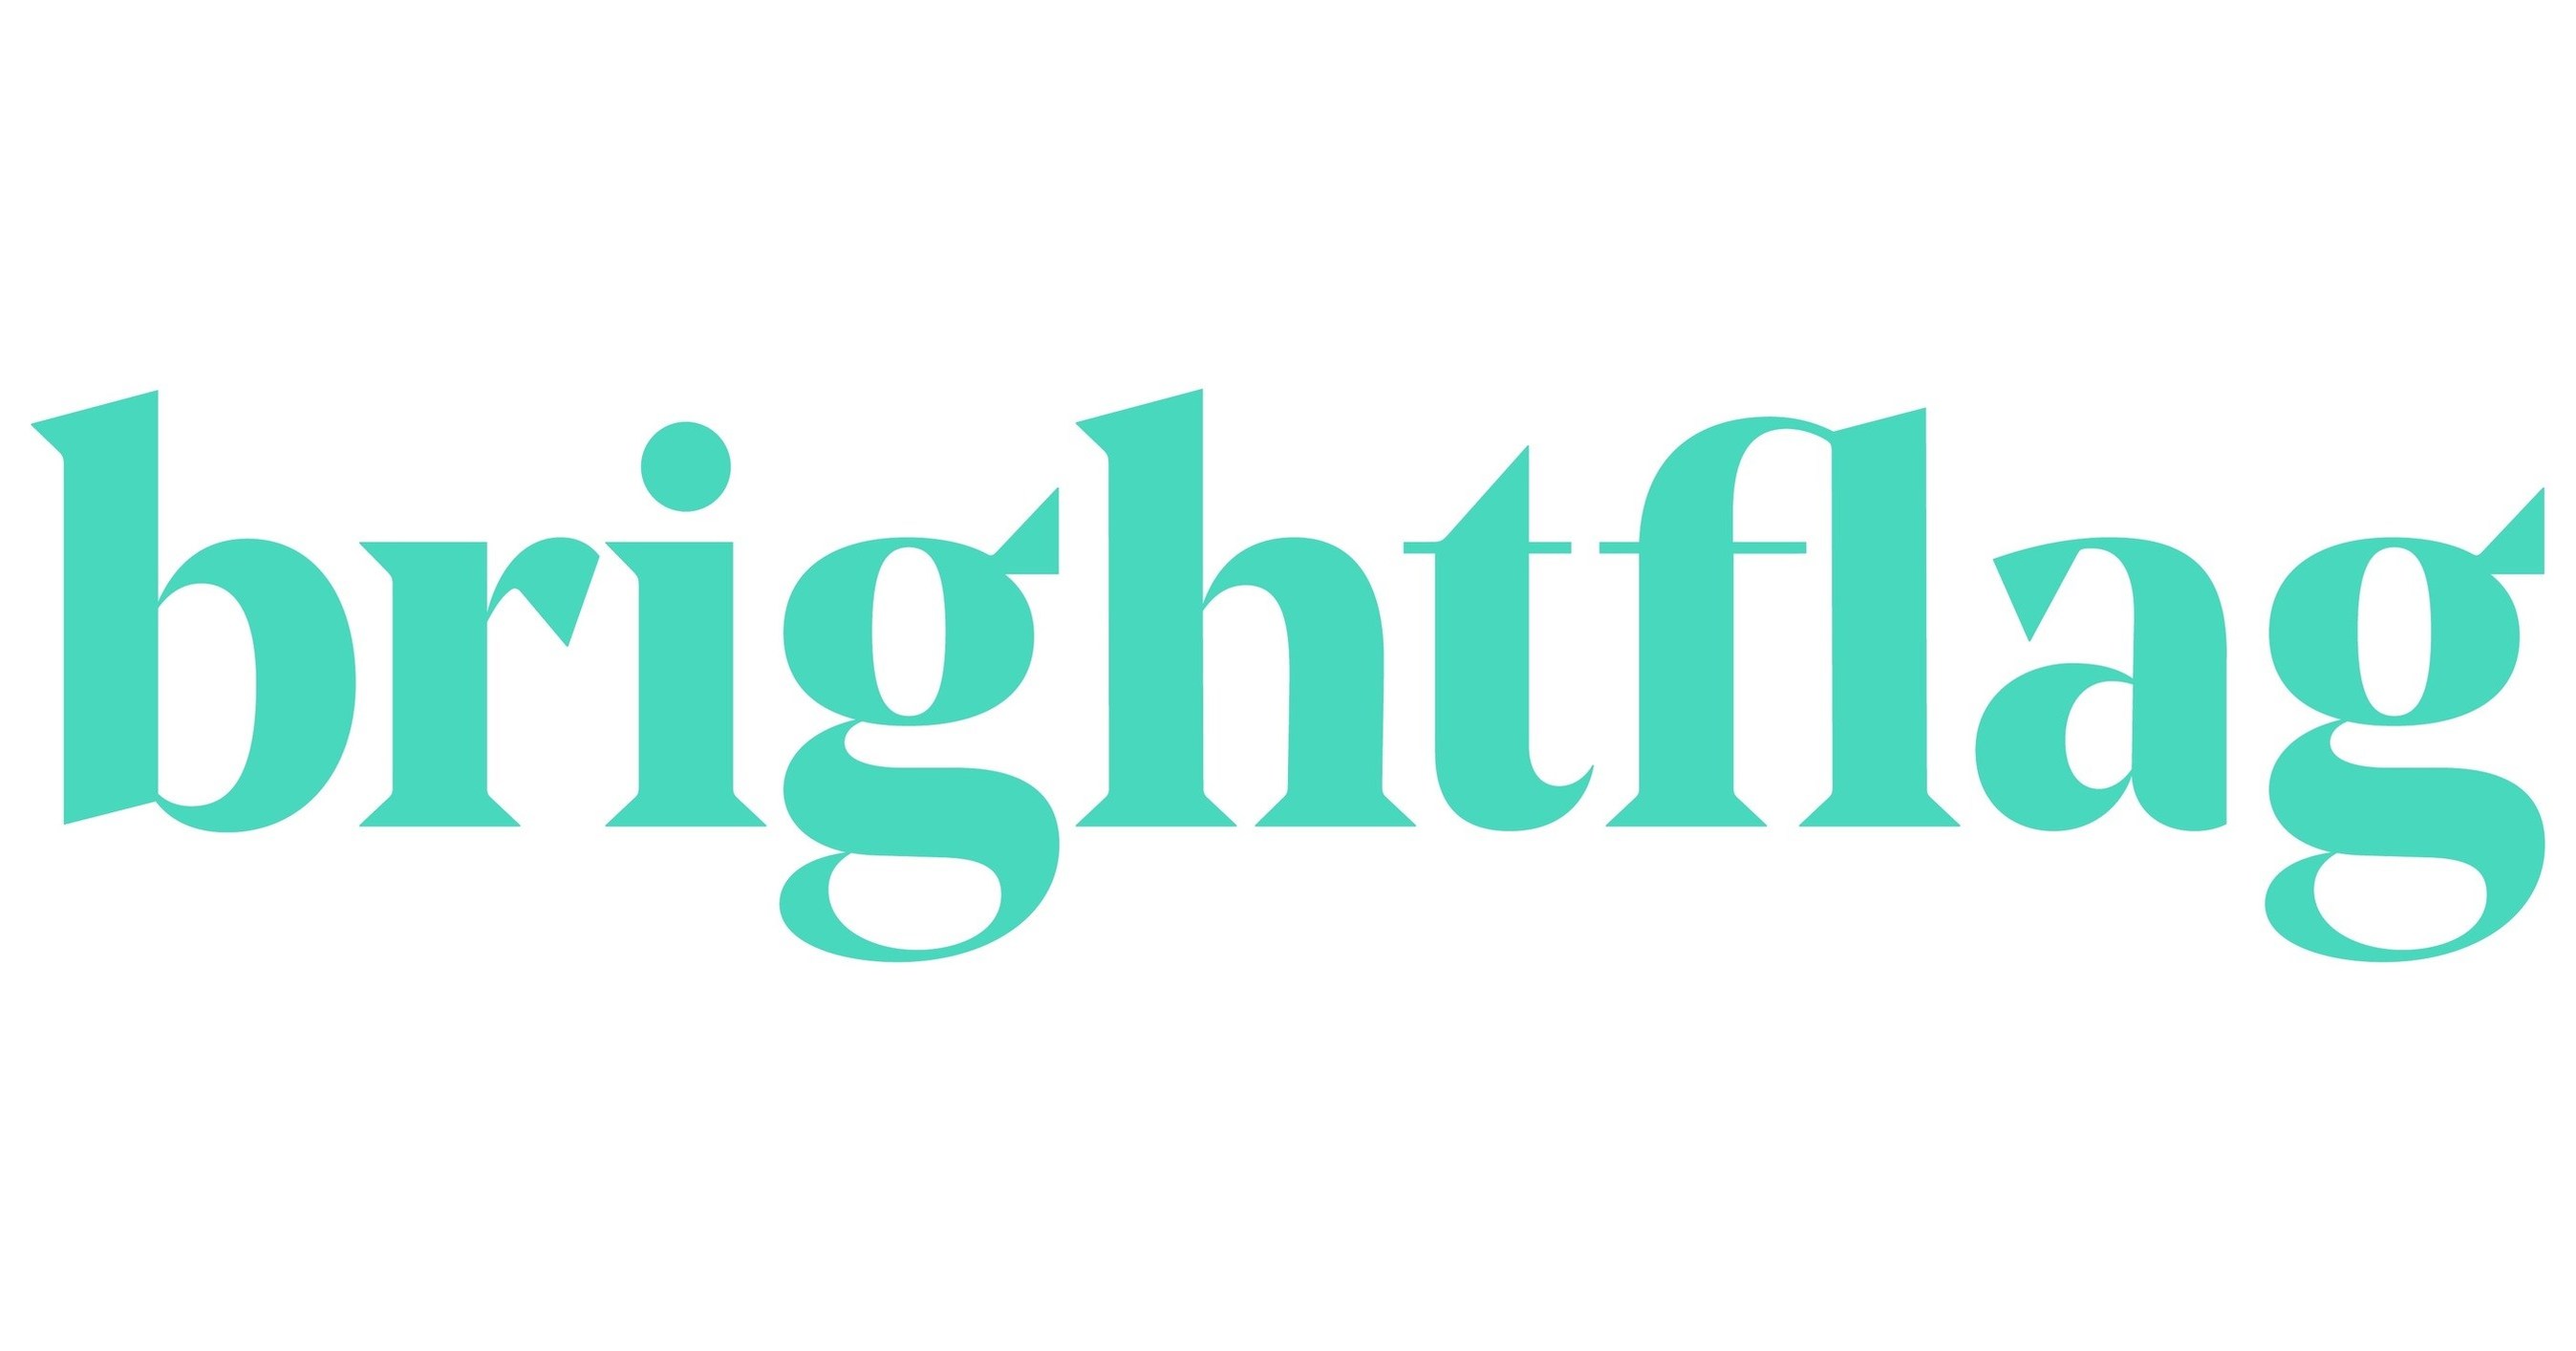 Brightflag Makes First Acquisition, Adding Joinder to Legal Operations Platform